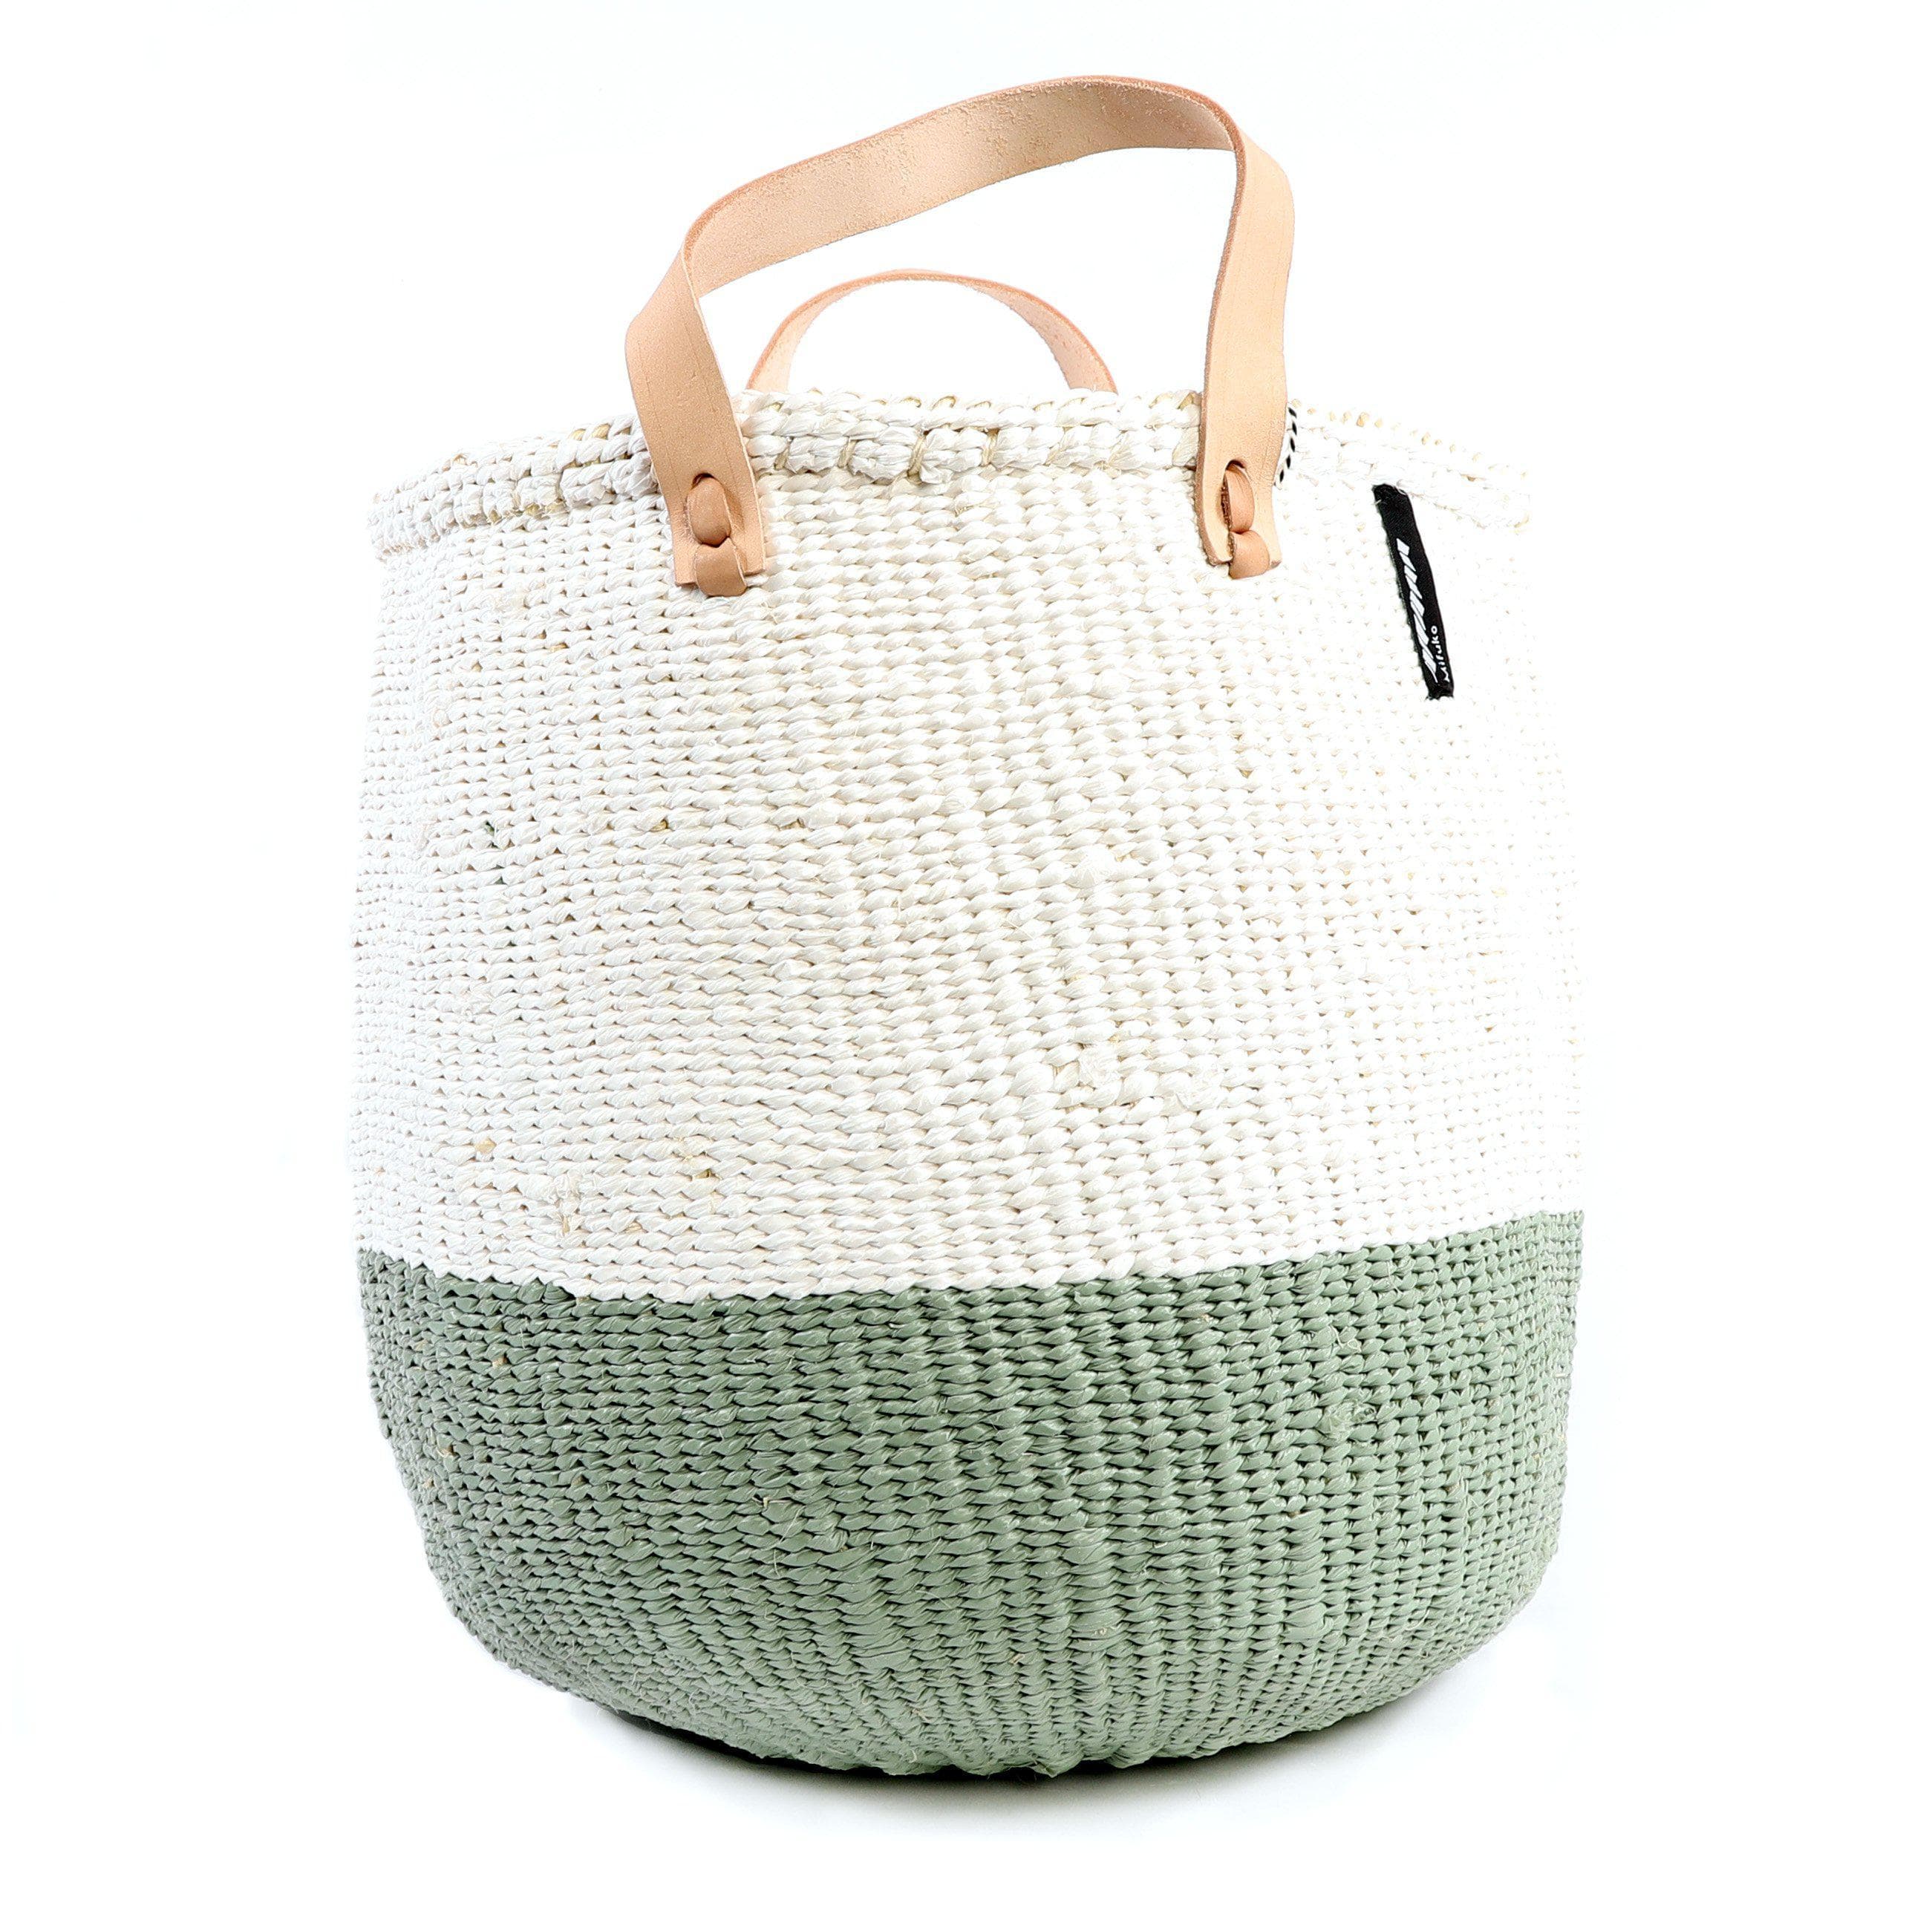 Handmade fair trade Partly recycled plastic and sisal Kiondo market basket | White and light green duo M